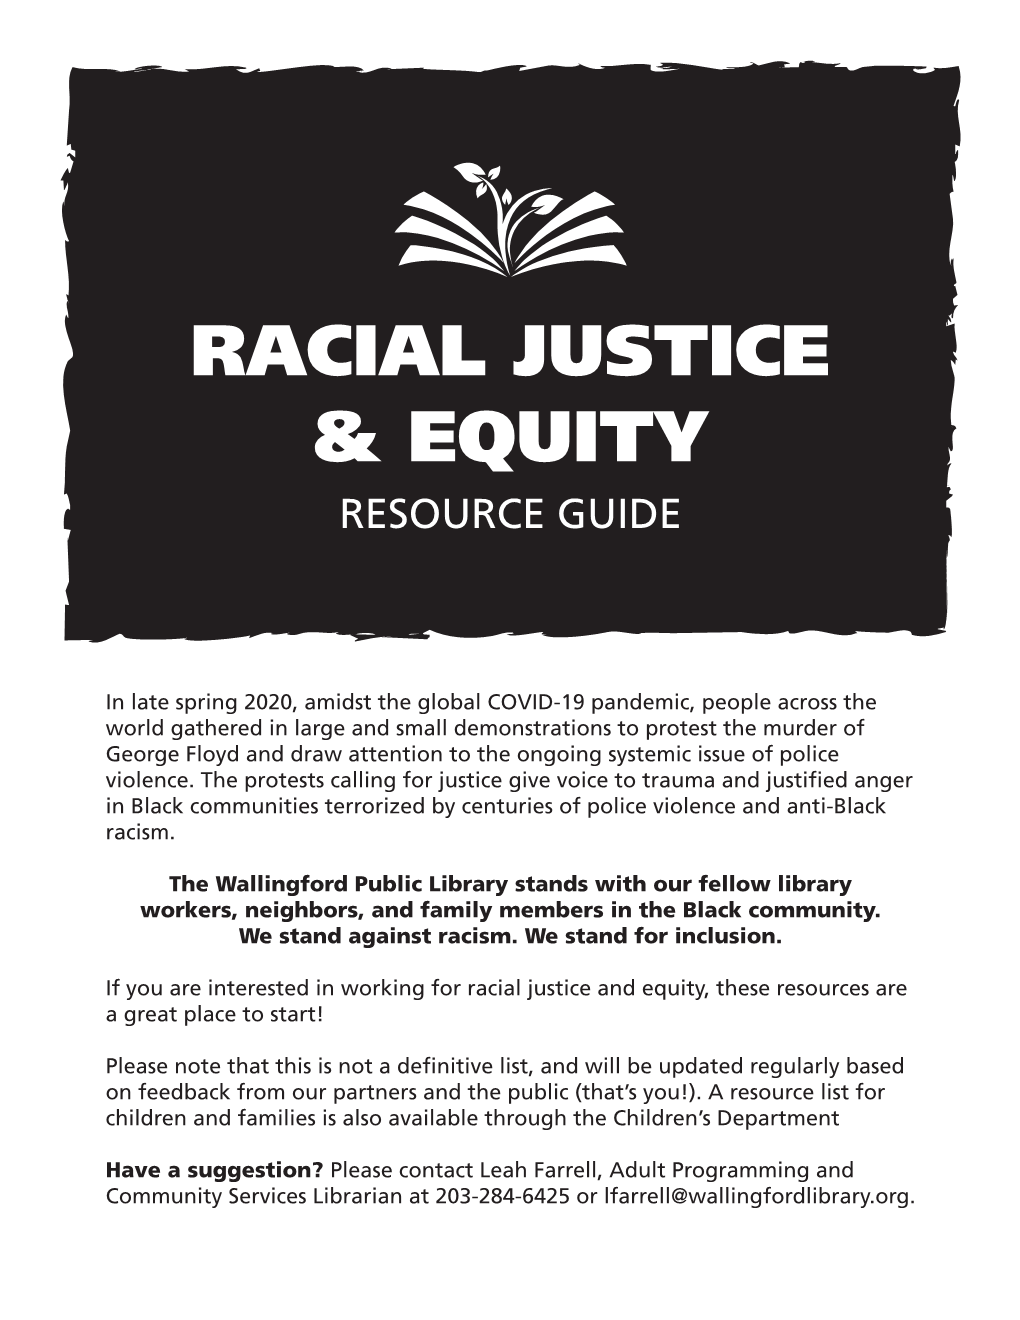 Racial Justice & Equity Resource Guide